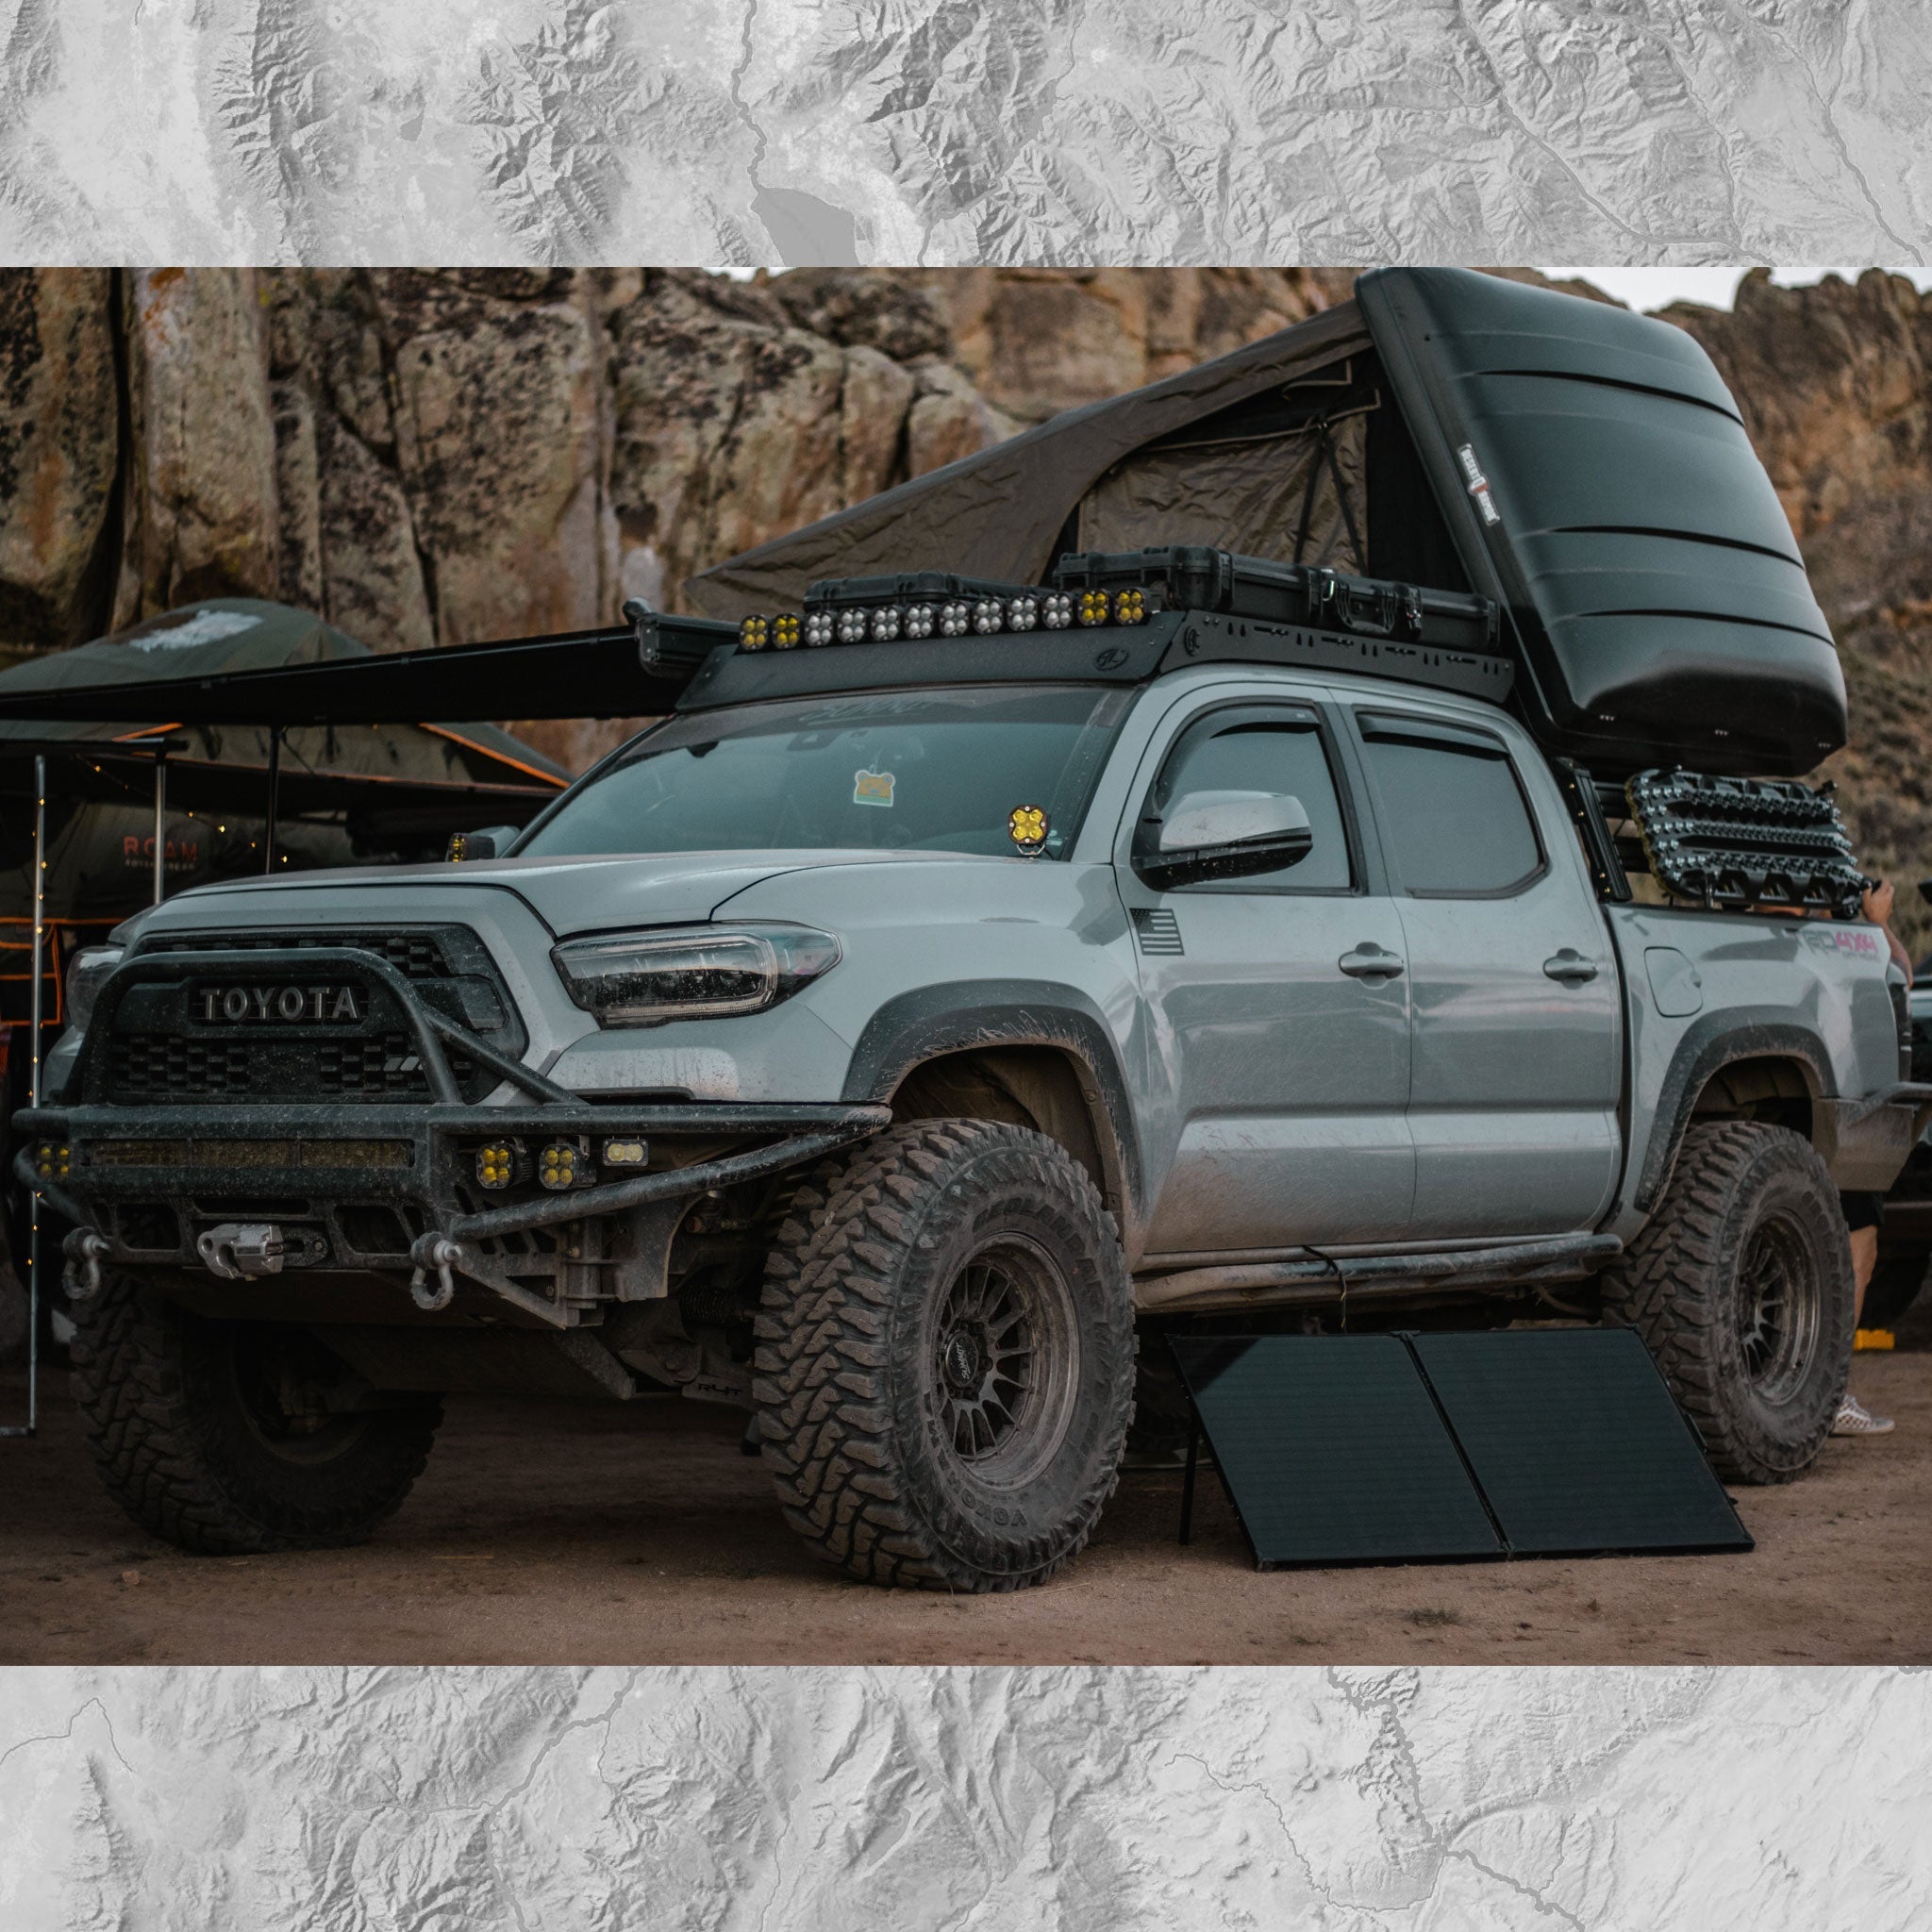 The Dark Yota a Toyota Tacoma with 20 degree XTR1 overlanding bed rack, standard wing bed brackets, 14 inch height, and HD triple column setup.